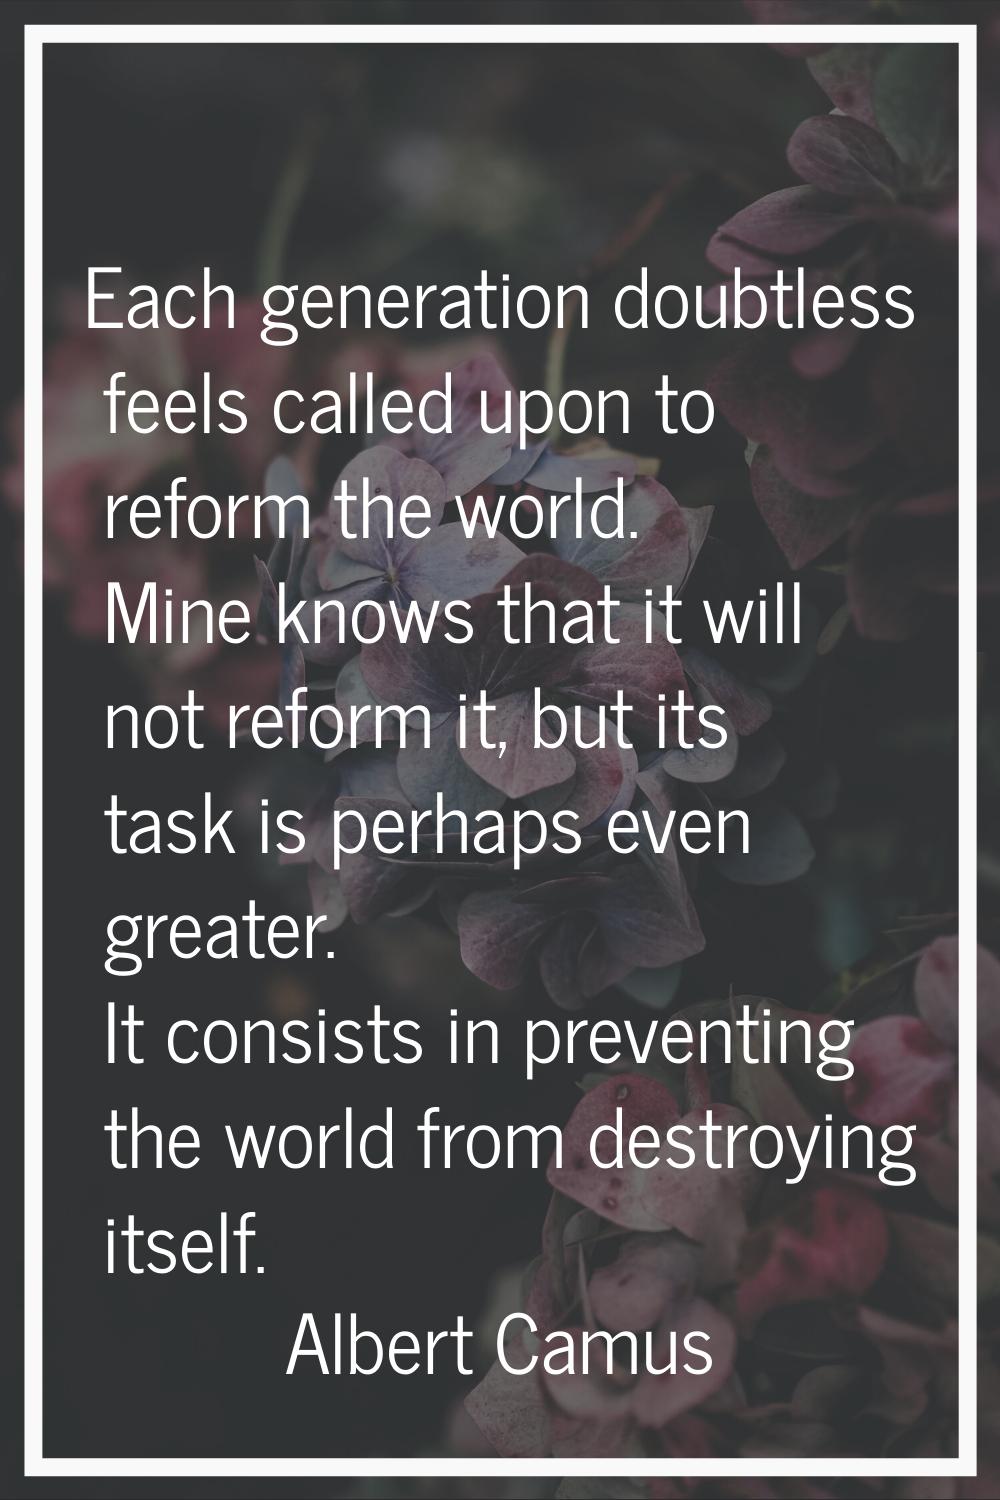 Each generation doubtless feels called upon to reform the world. Mine knows that it will not reform